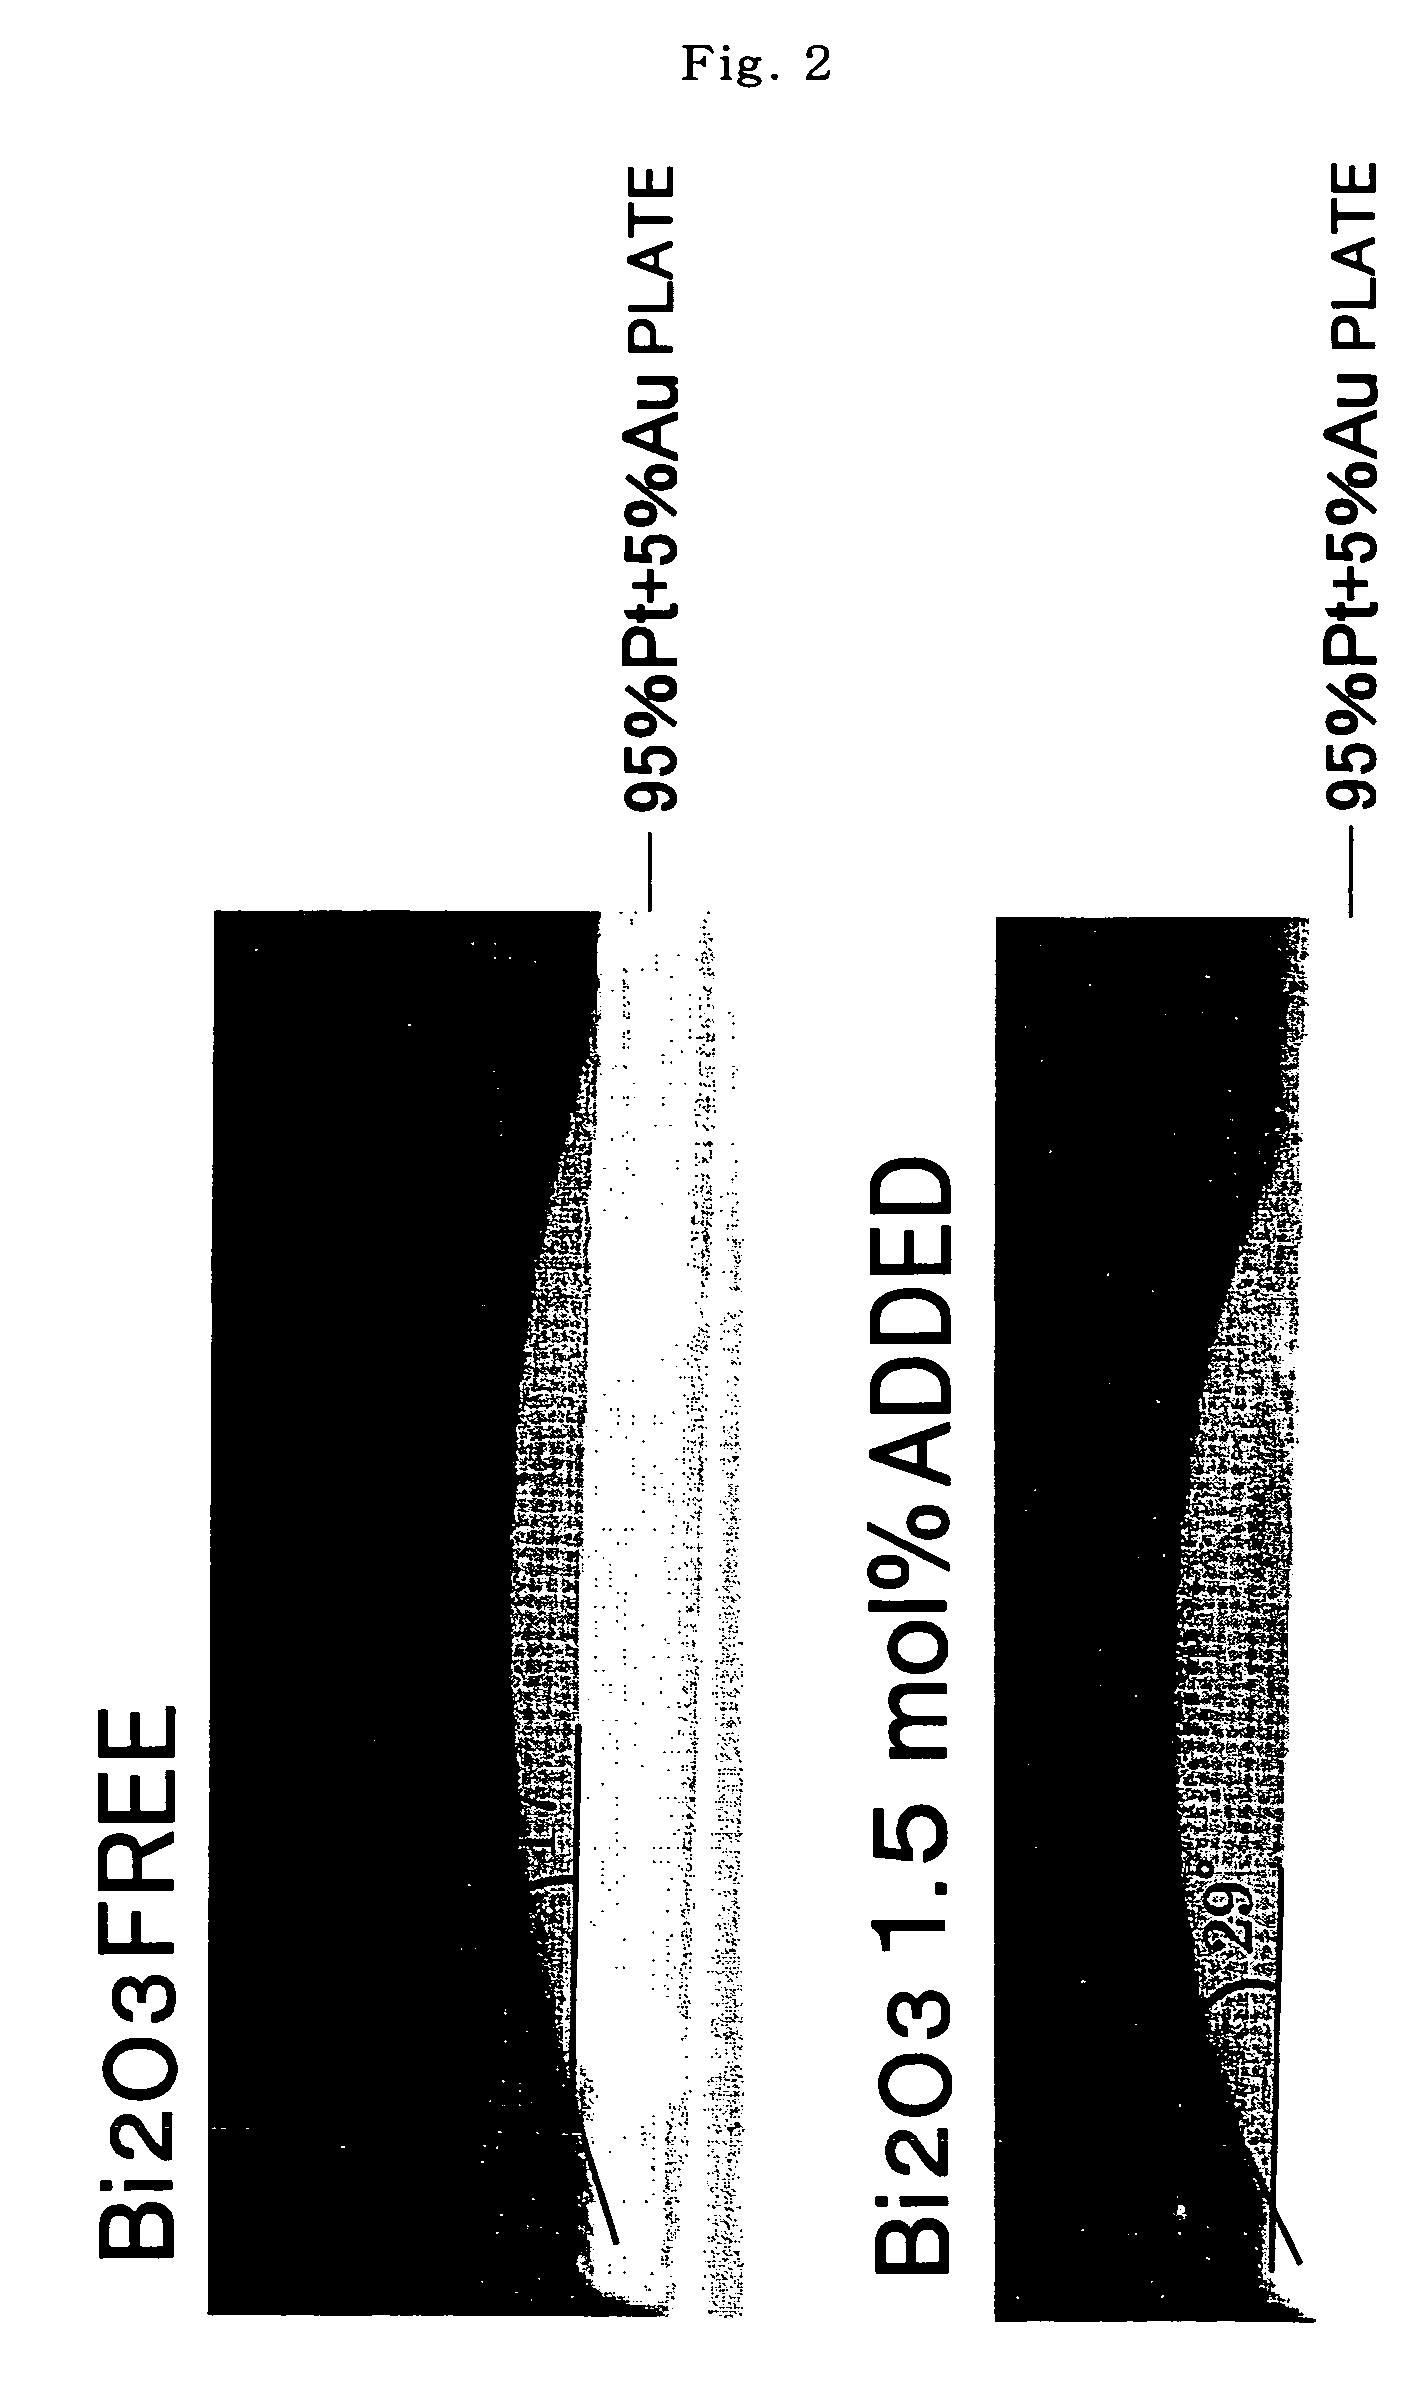 Preforms for precision press molding, optical elements, and methods of manufacturing the same